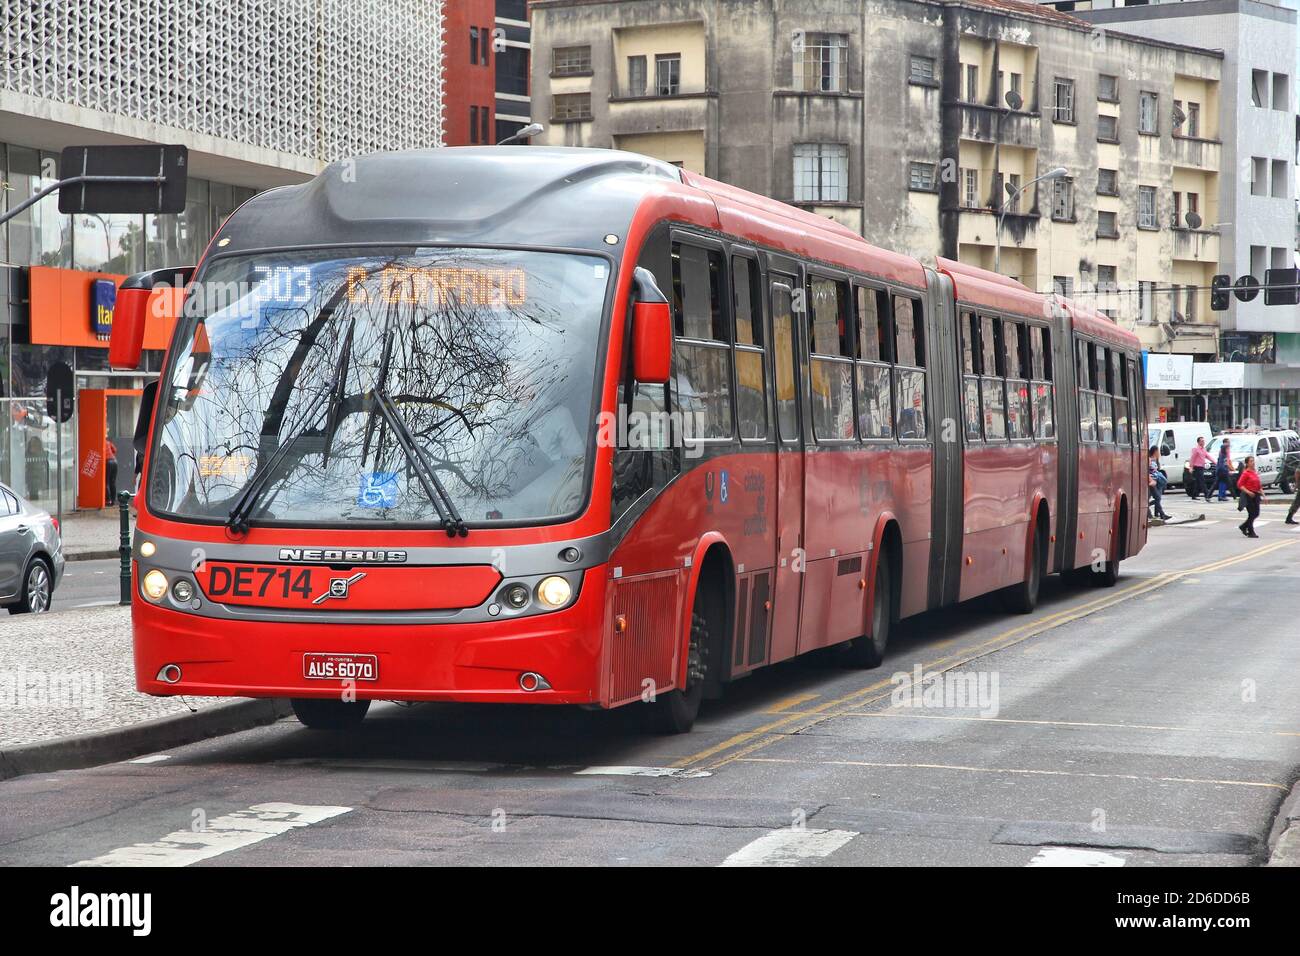 CURITIBA, BRAZIL - OCTOBER 7, 2014: People ride Neobus city bus in Curitiba, Brazil. Curitiba's bus system is world famous for its efficiency. Founded Stock Photo